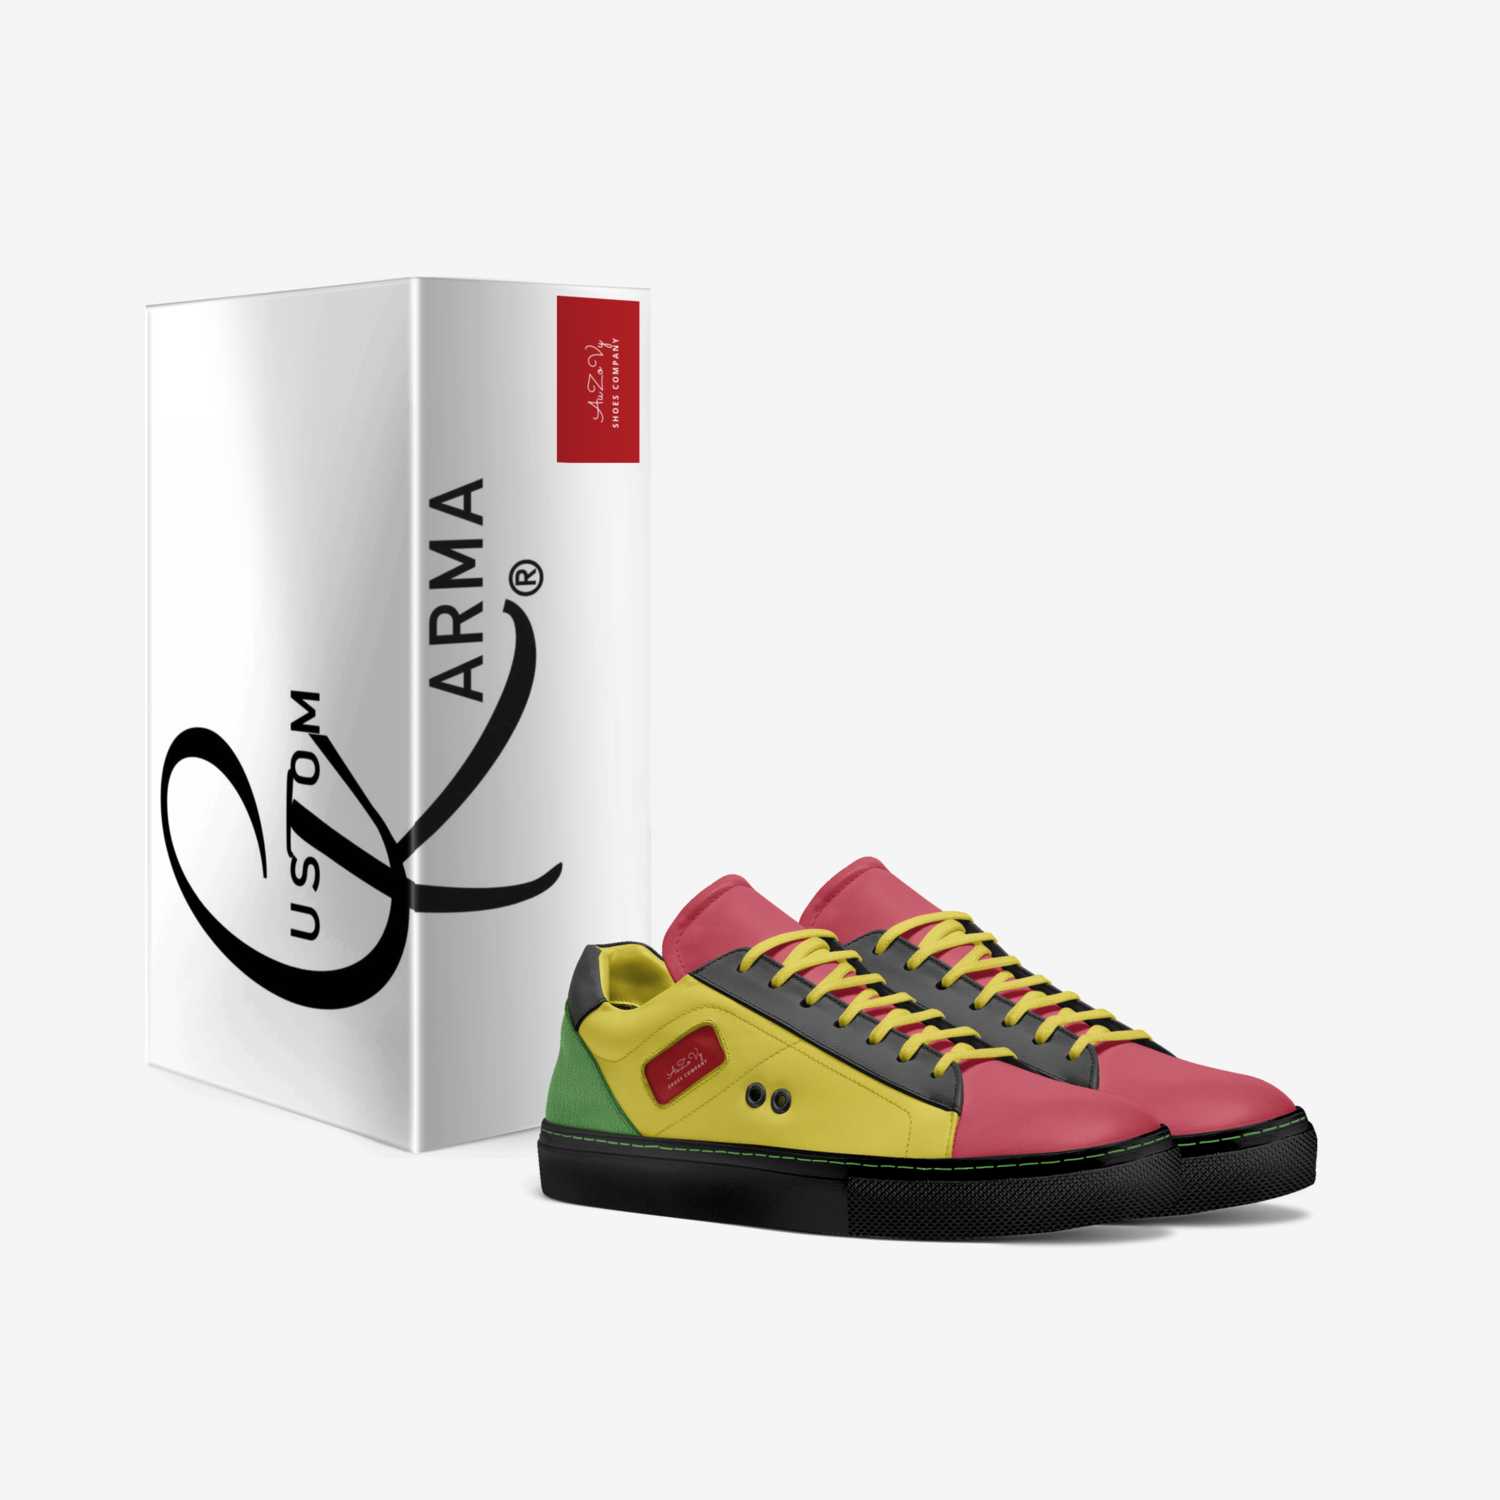 AuZoVy custom made in Italy shoes by Lonnell Jefferson | Box view